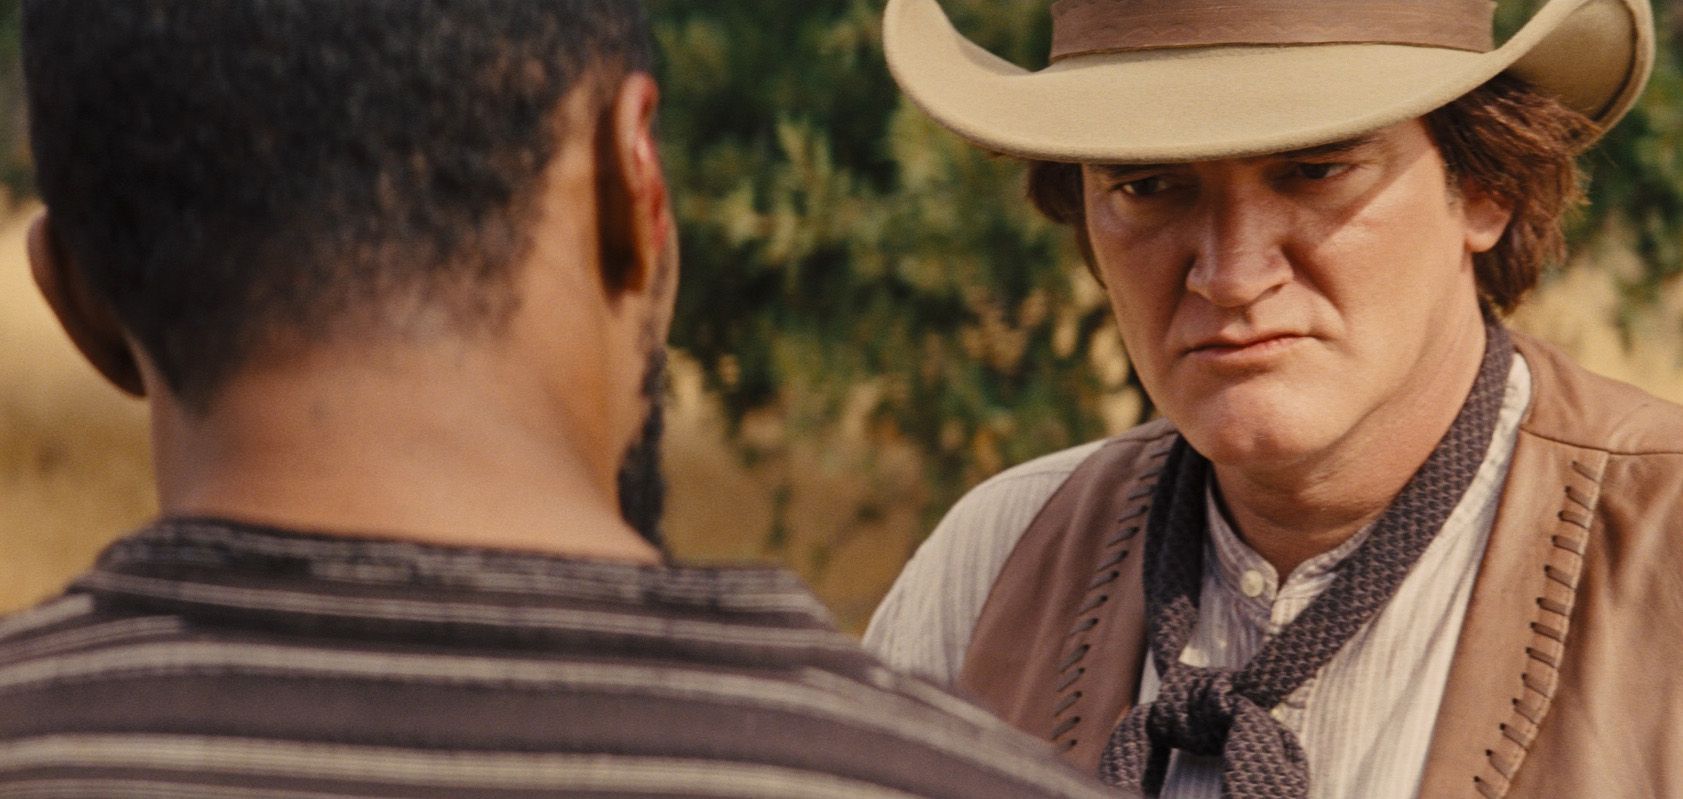 Quentin Tarantino Returning To The Director’s Chair For ‘Justified’ Revival At FX